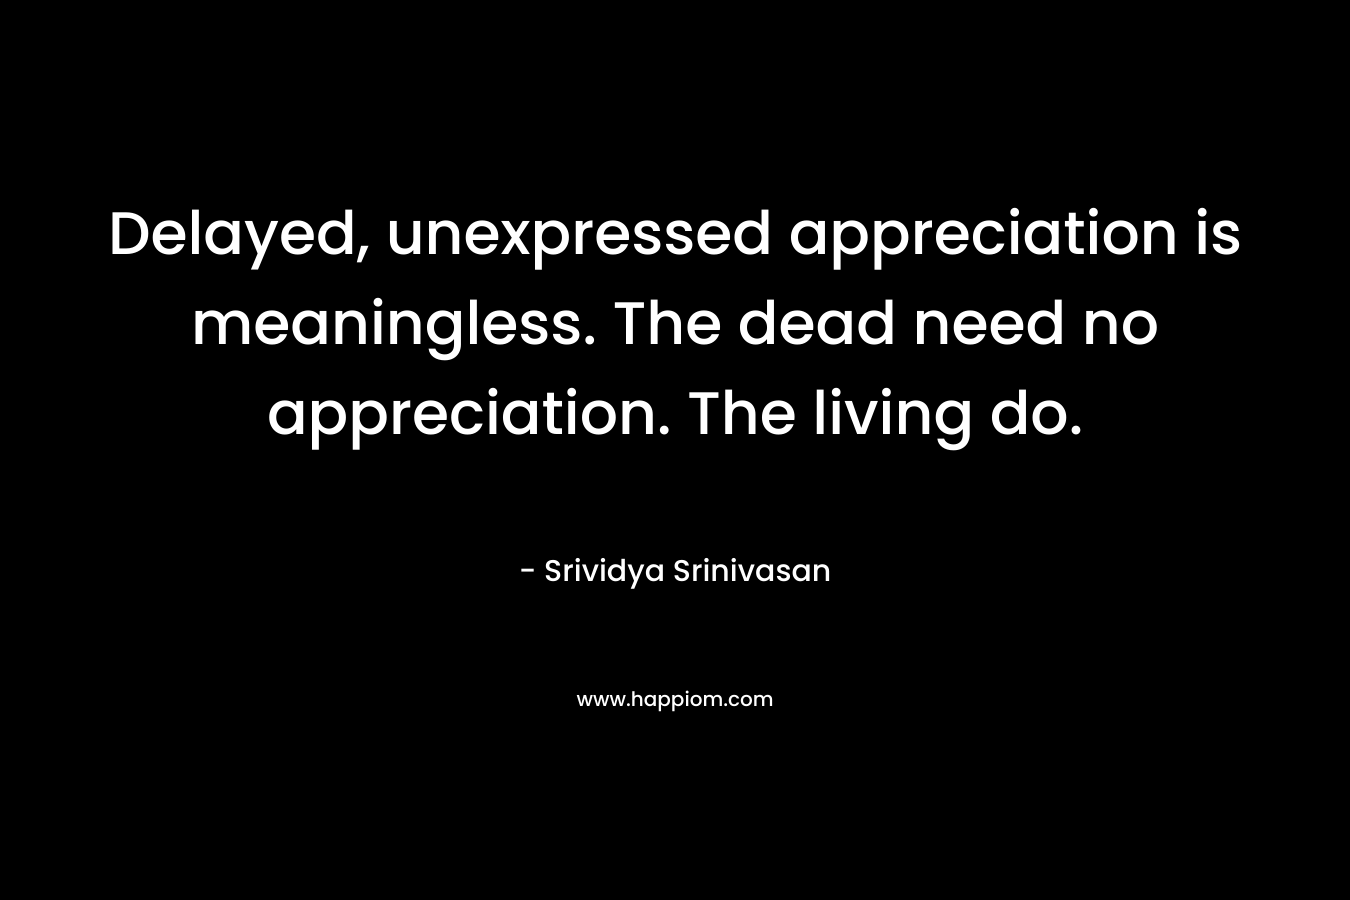 Delayed, unexpressed appreciation is meaningless. The dead need no appreciation. The living do.